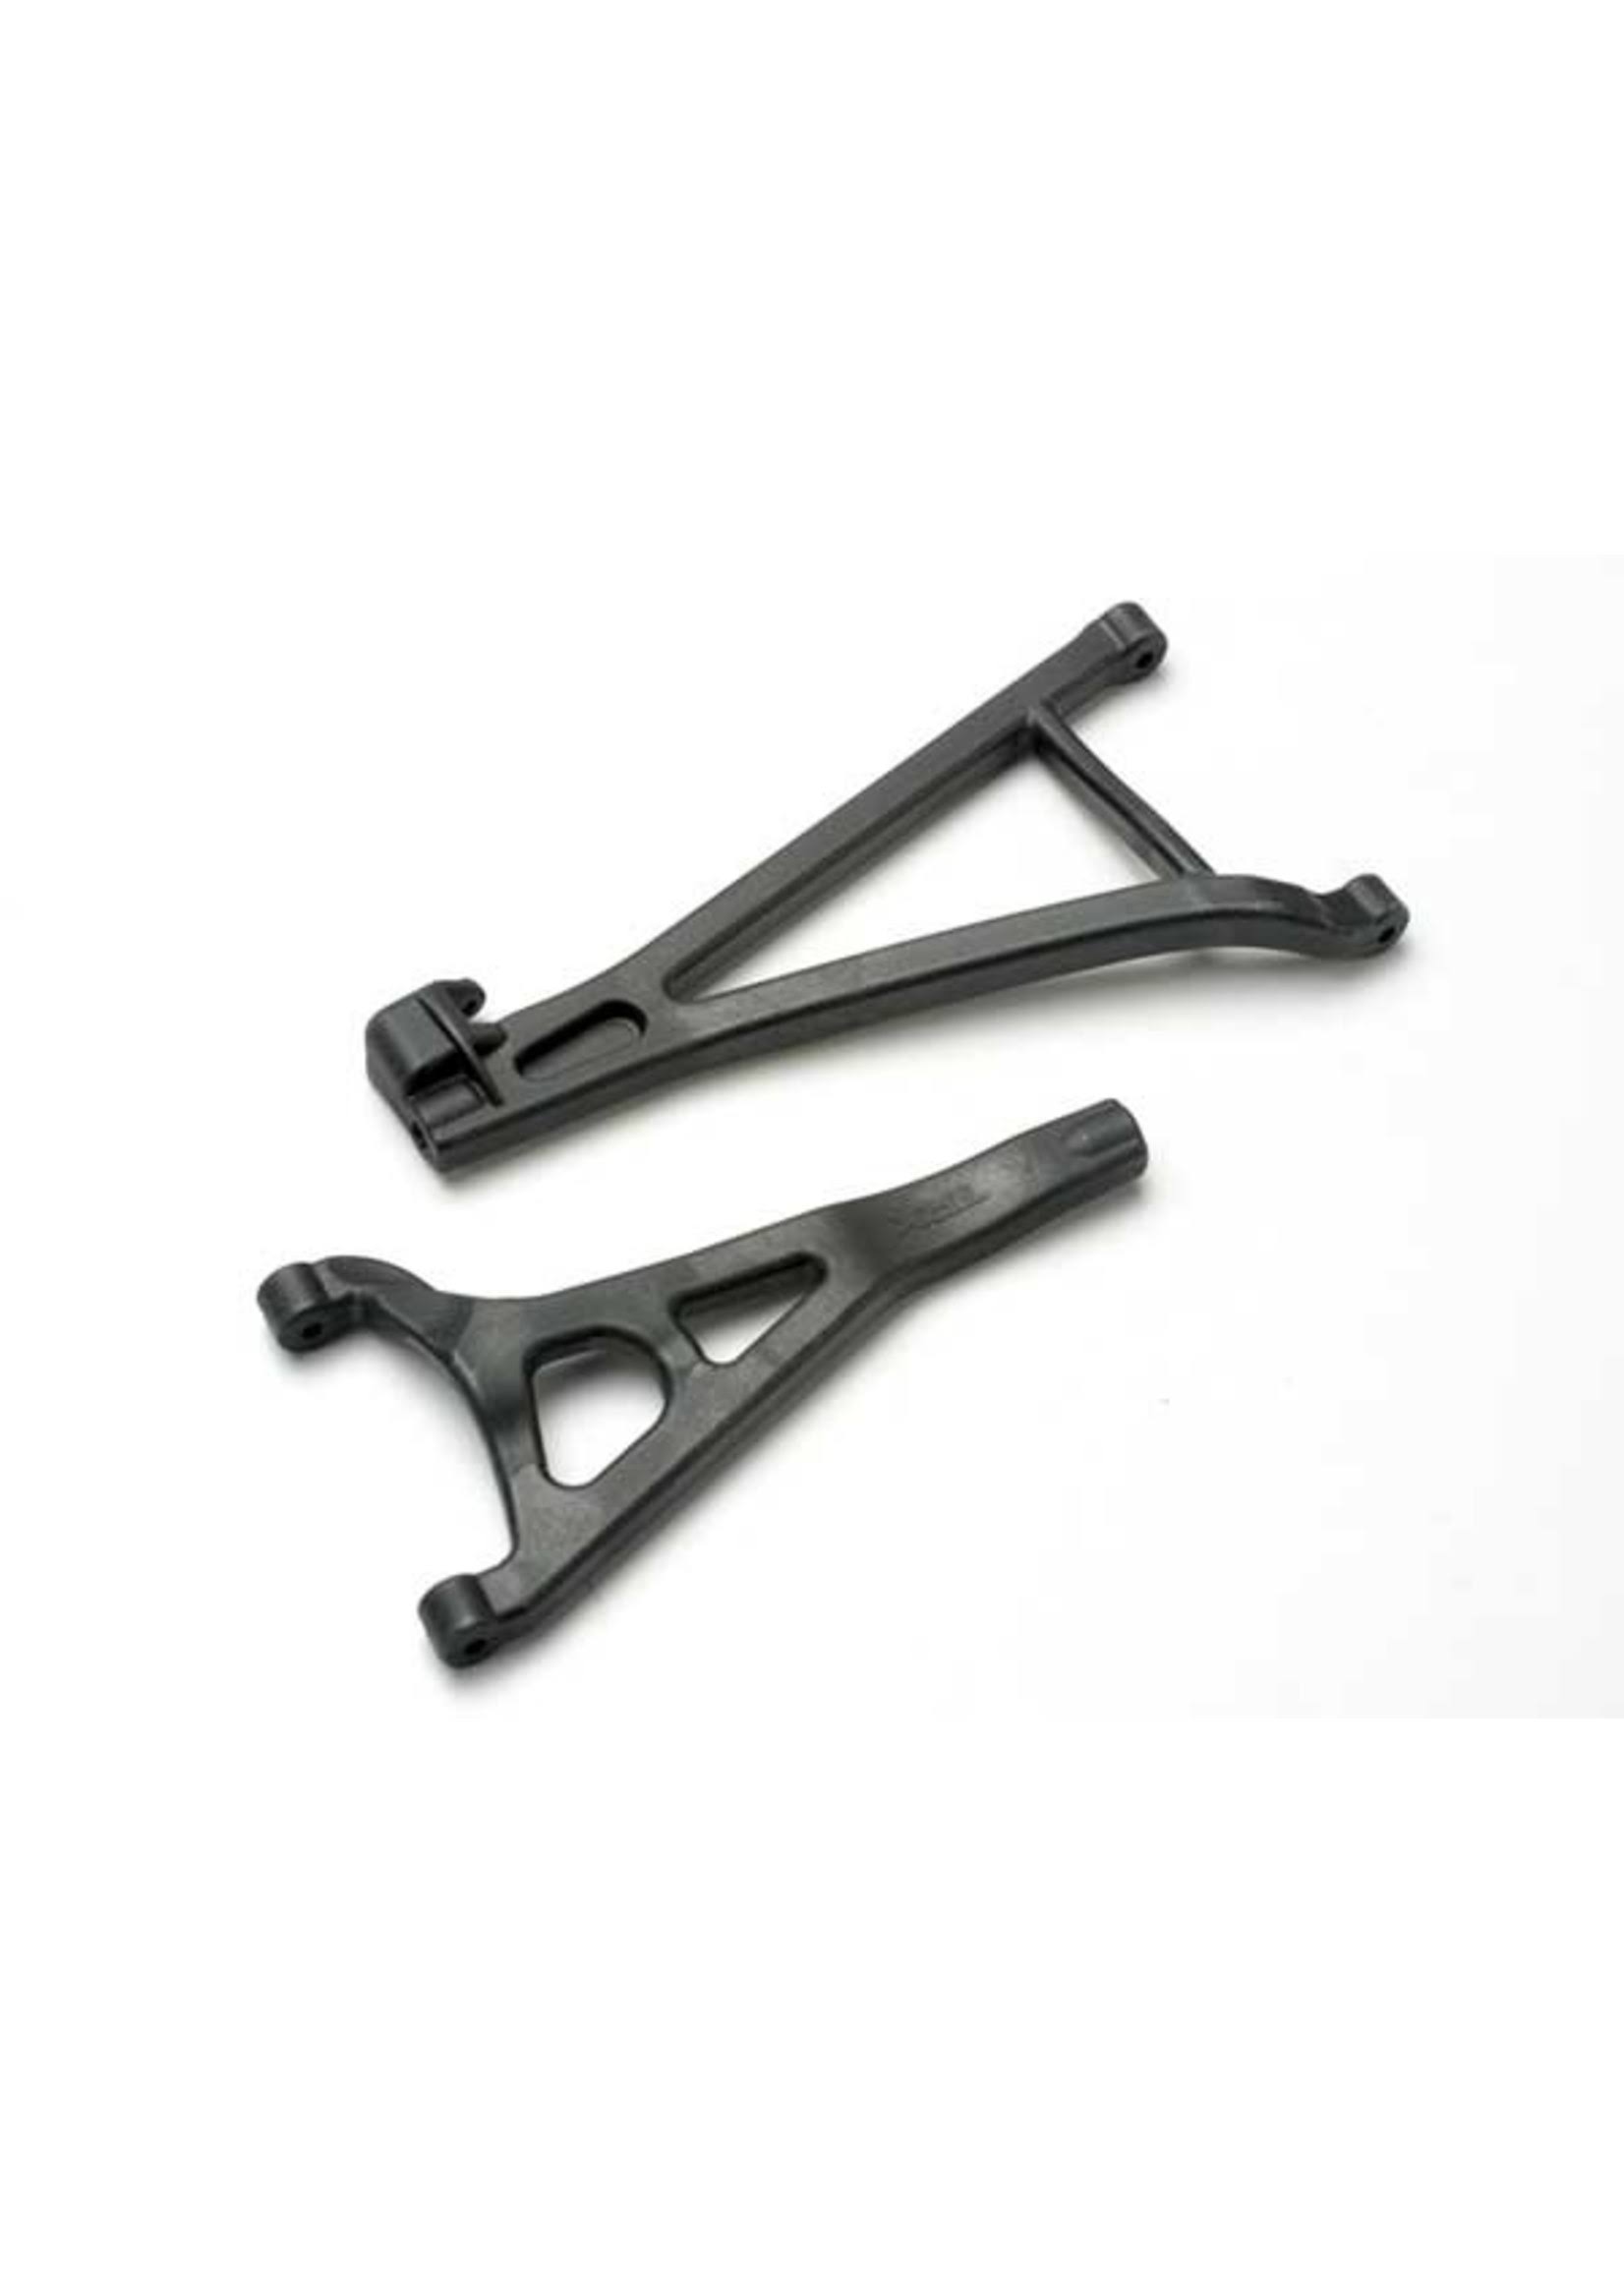 Traxxas Right Front Upper Lower Revo Suspension Arms